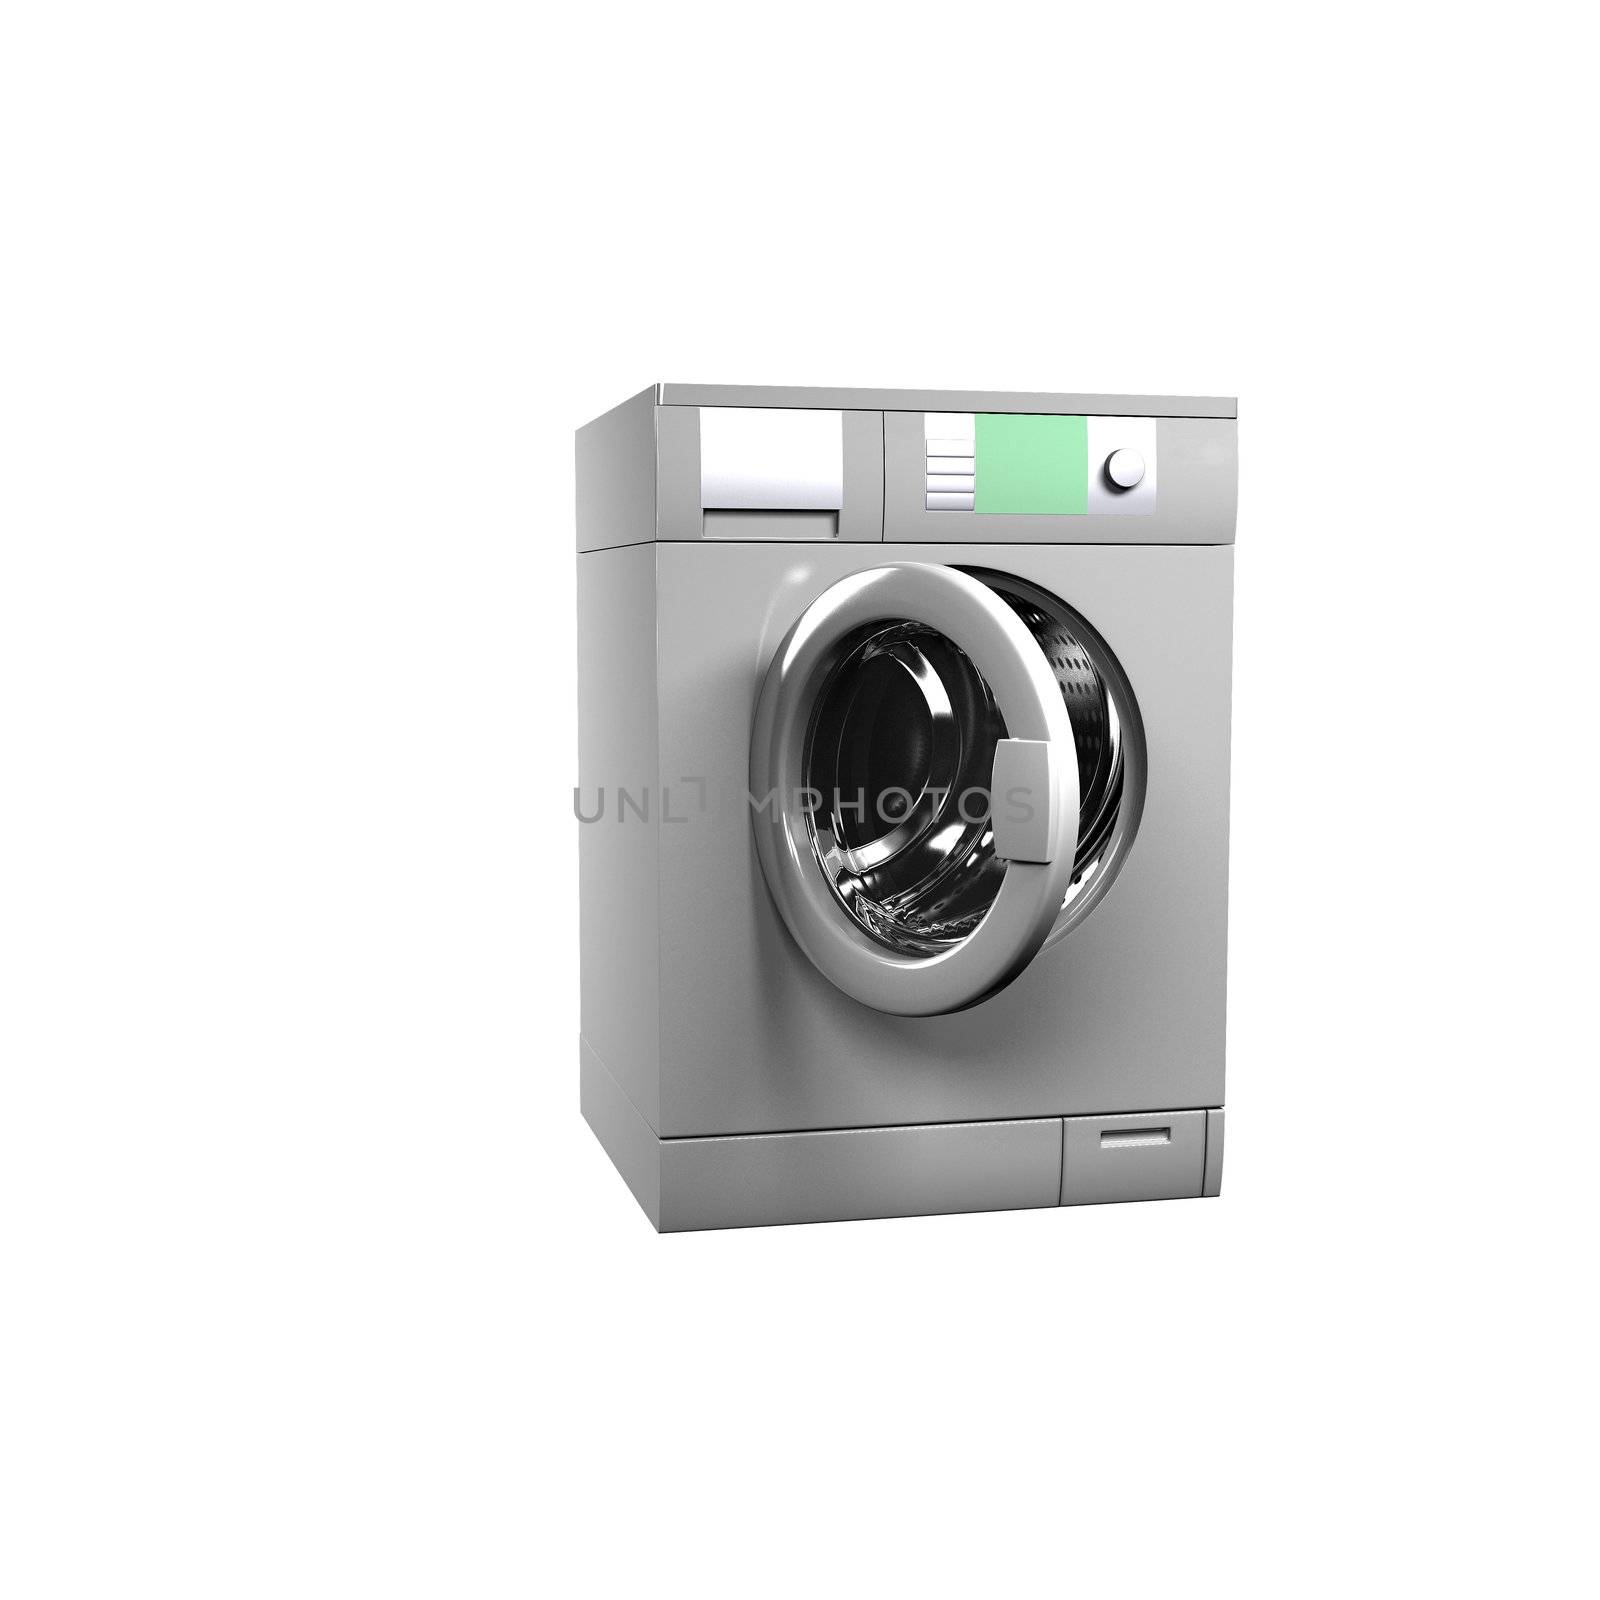 Washing machine isolated over white - 3d render by ozaiachin